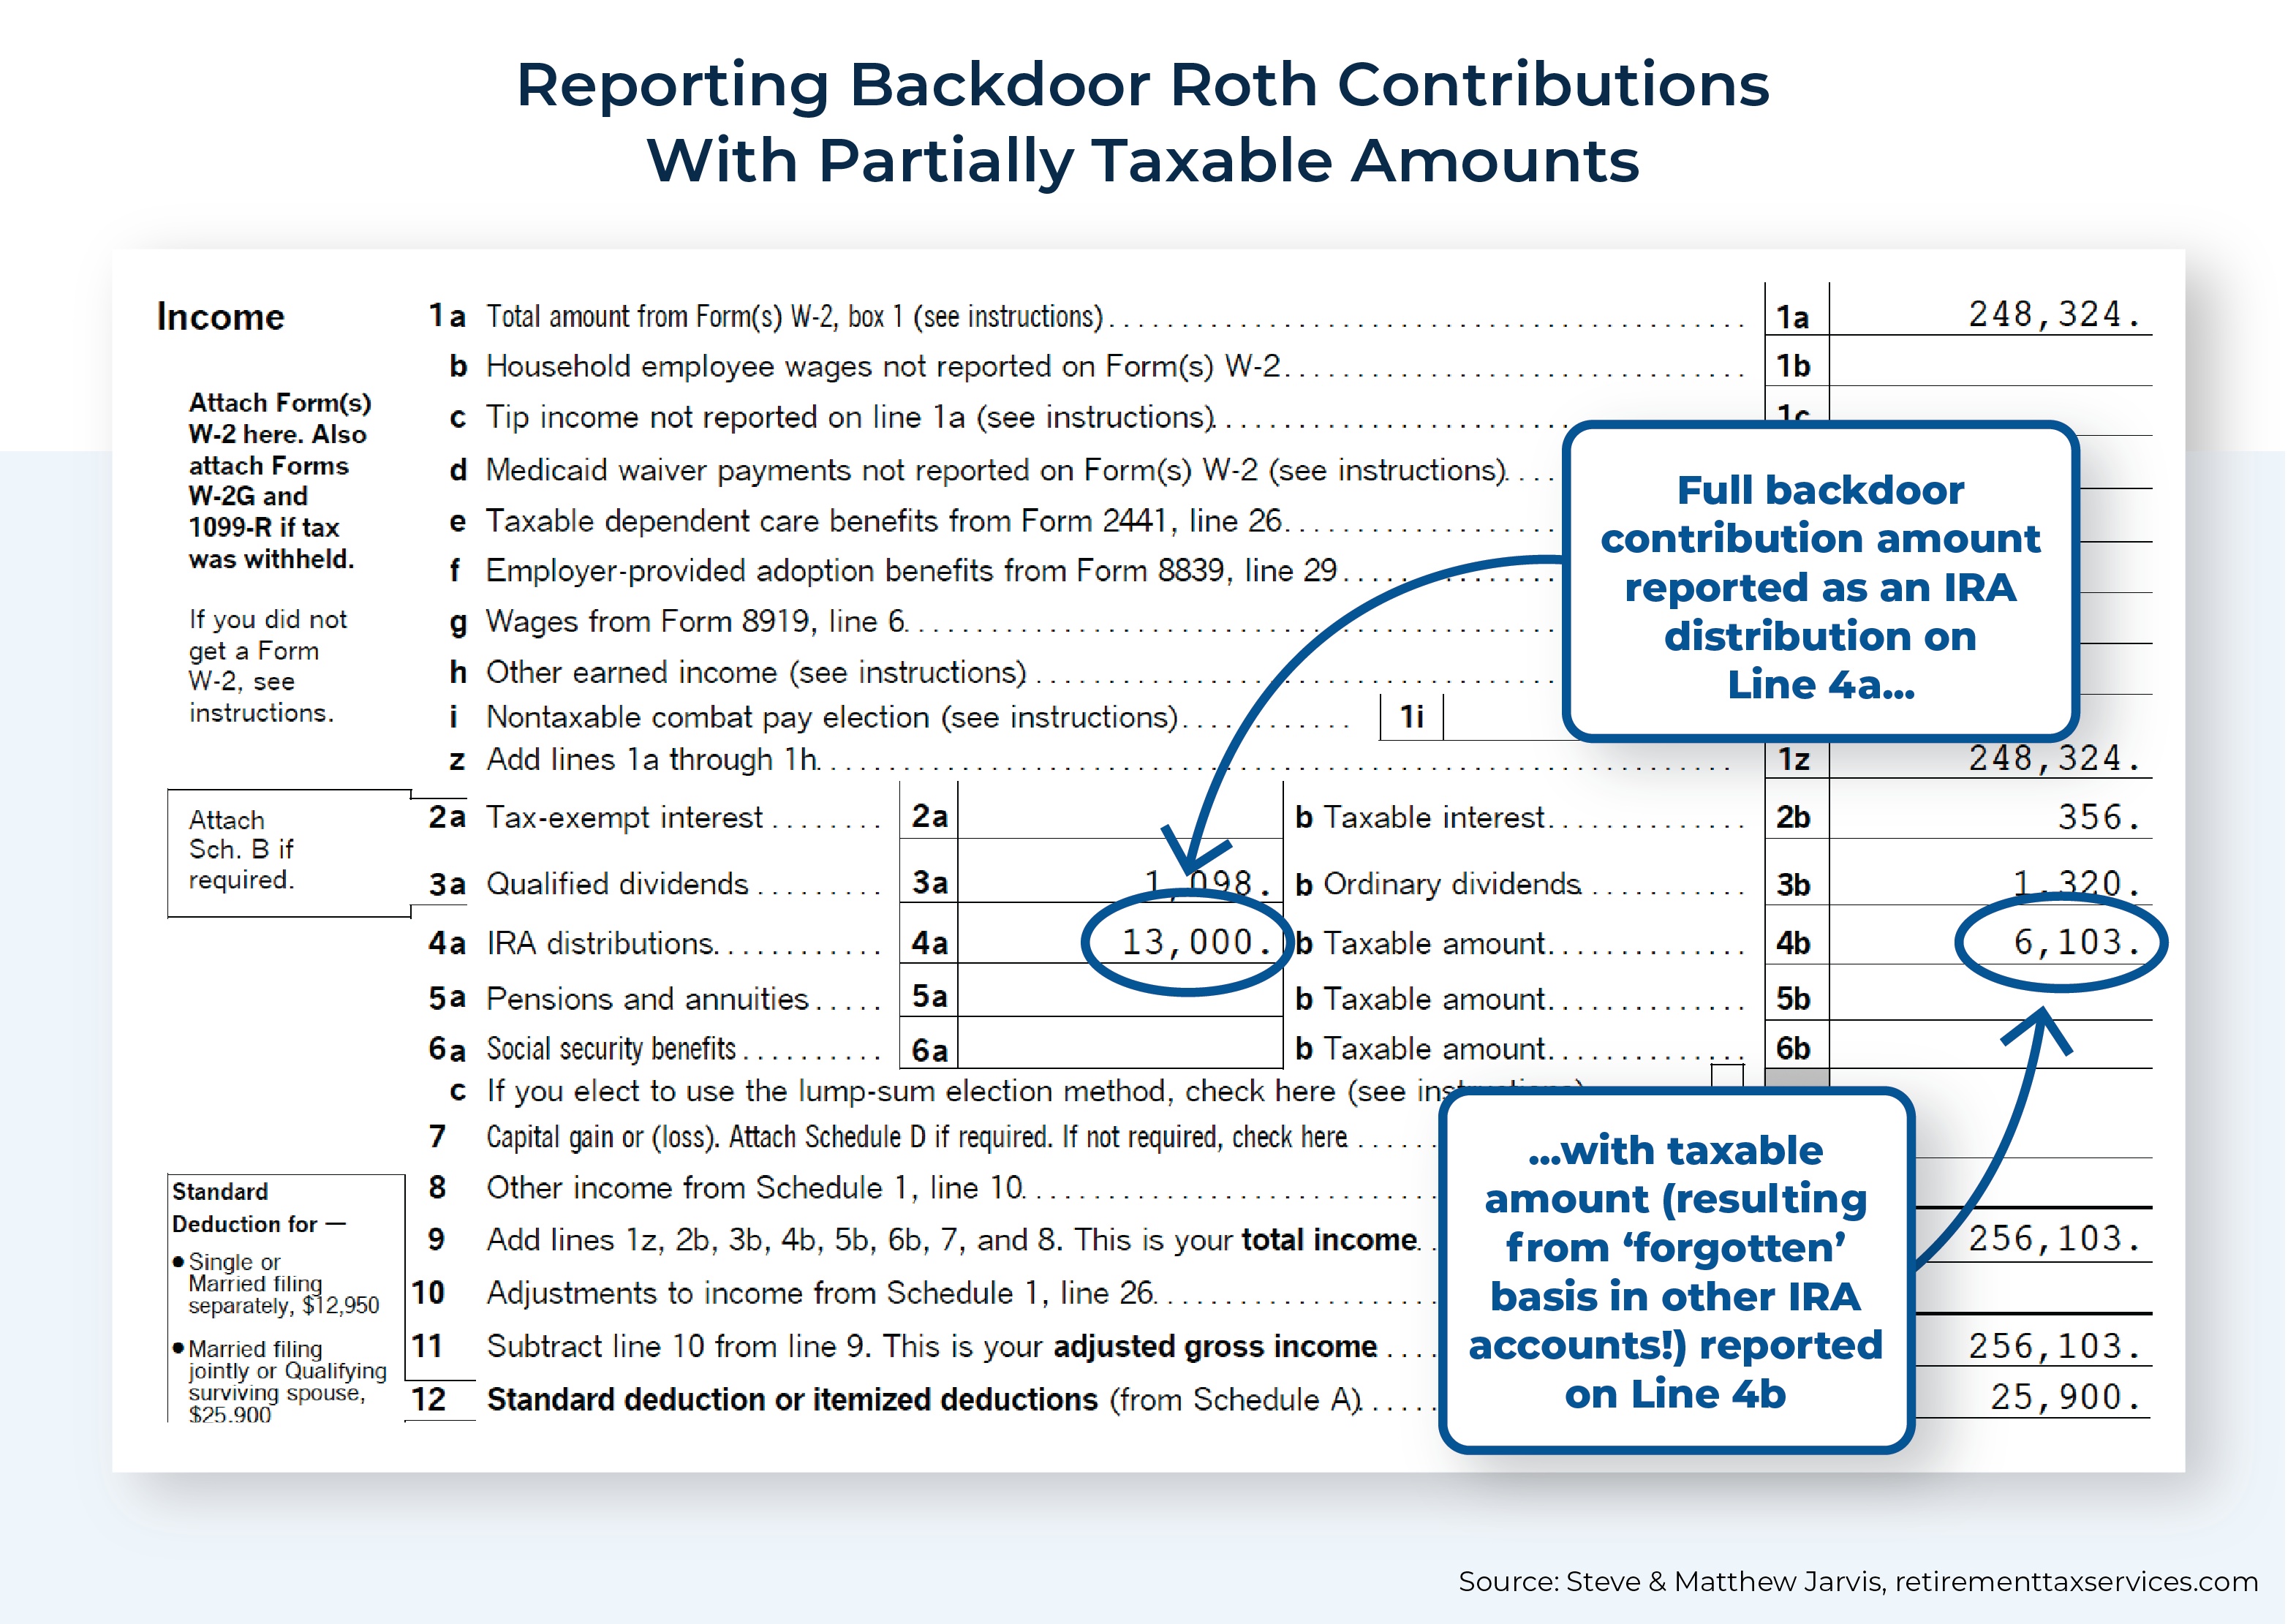 Reporting Backdoor Roth Contributions With Partially Taxable Amounts